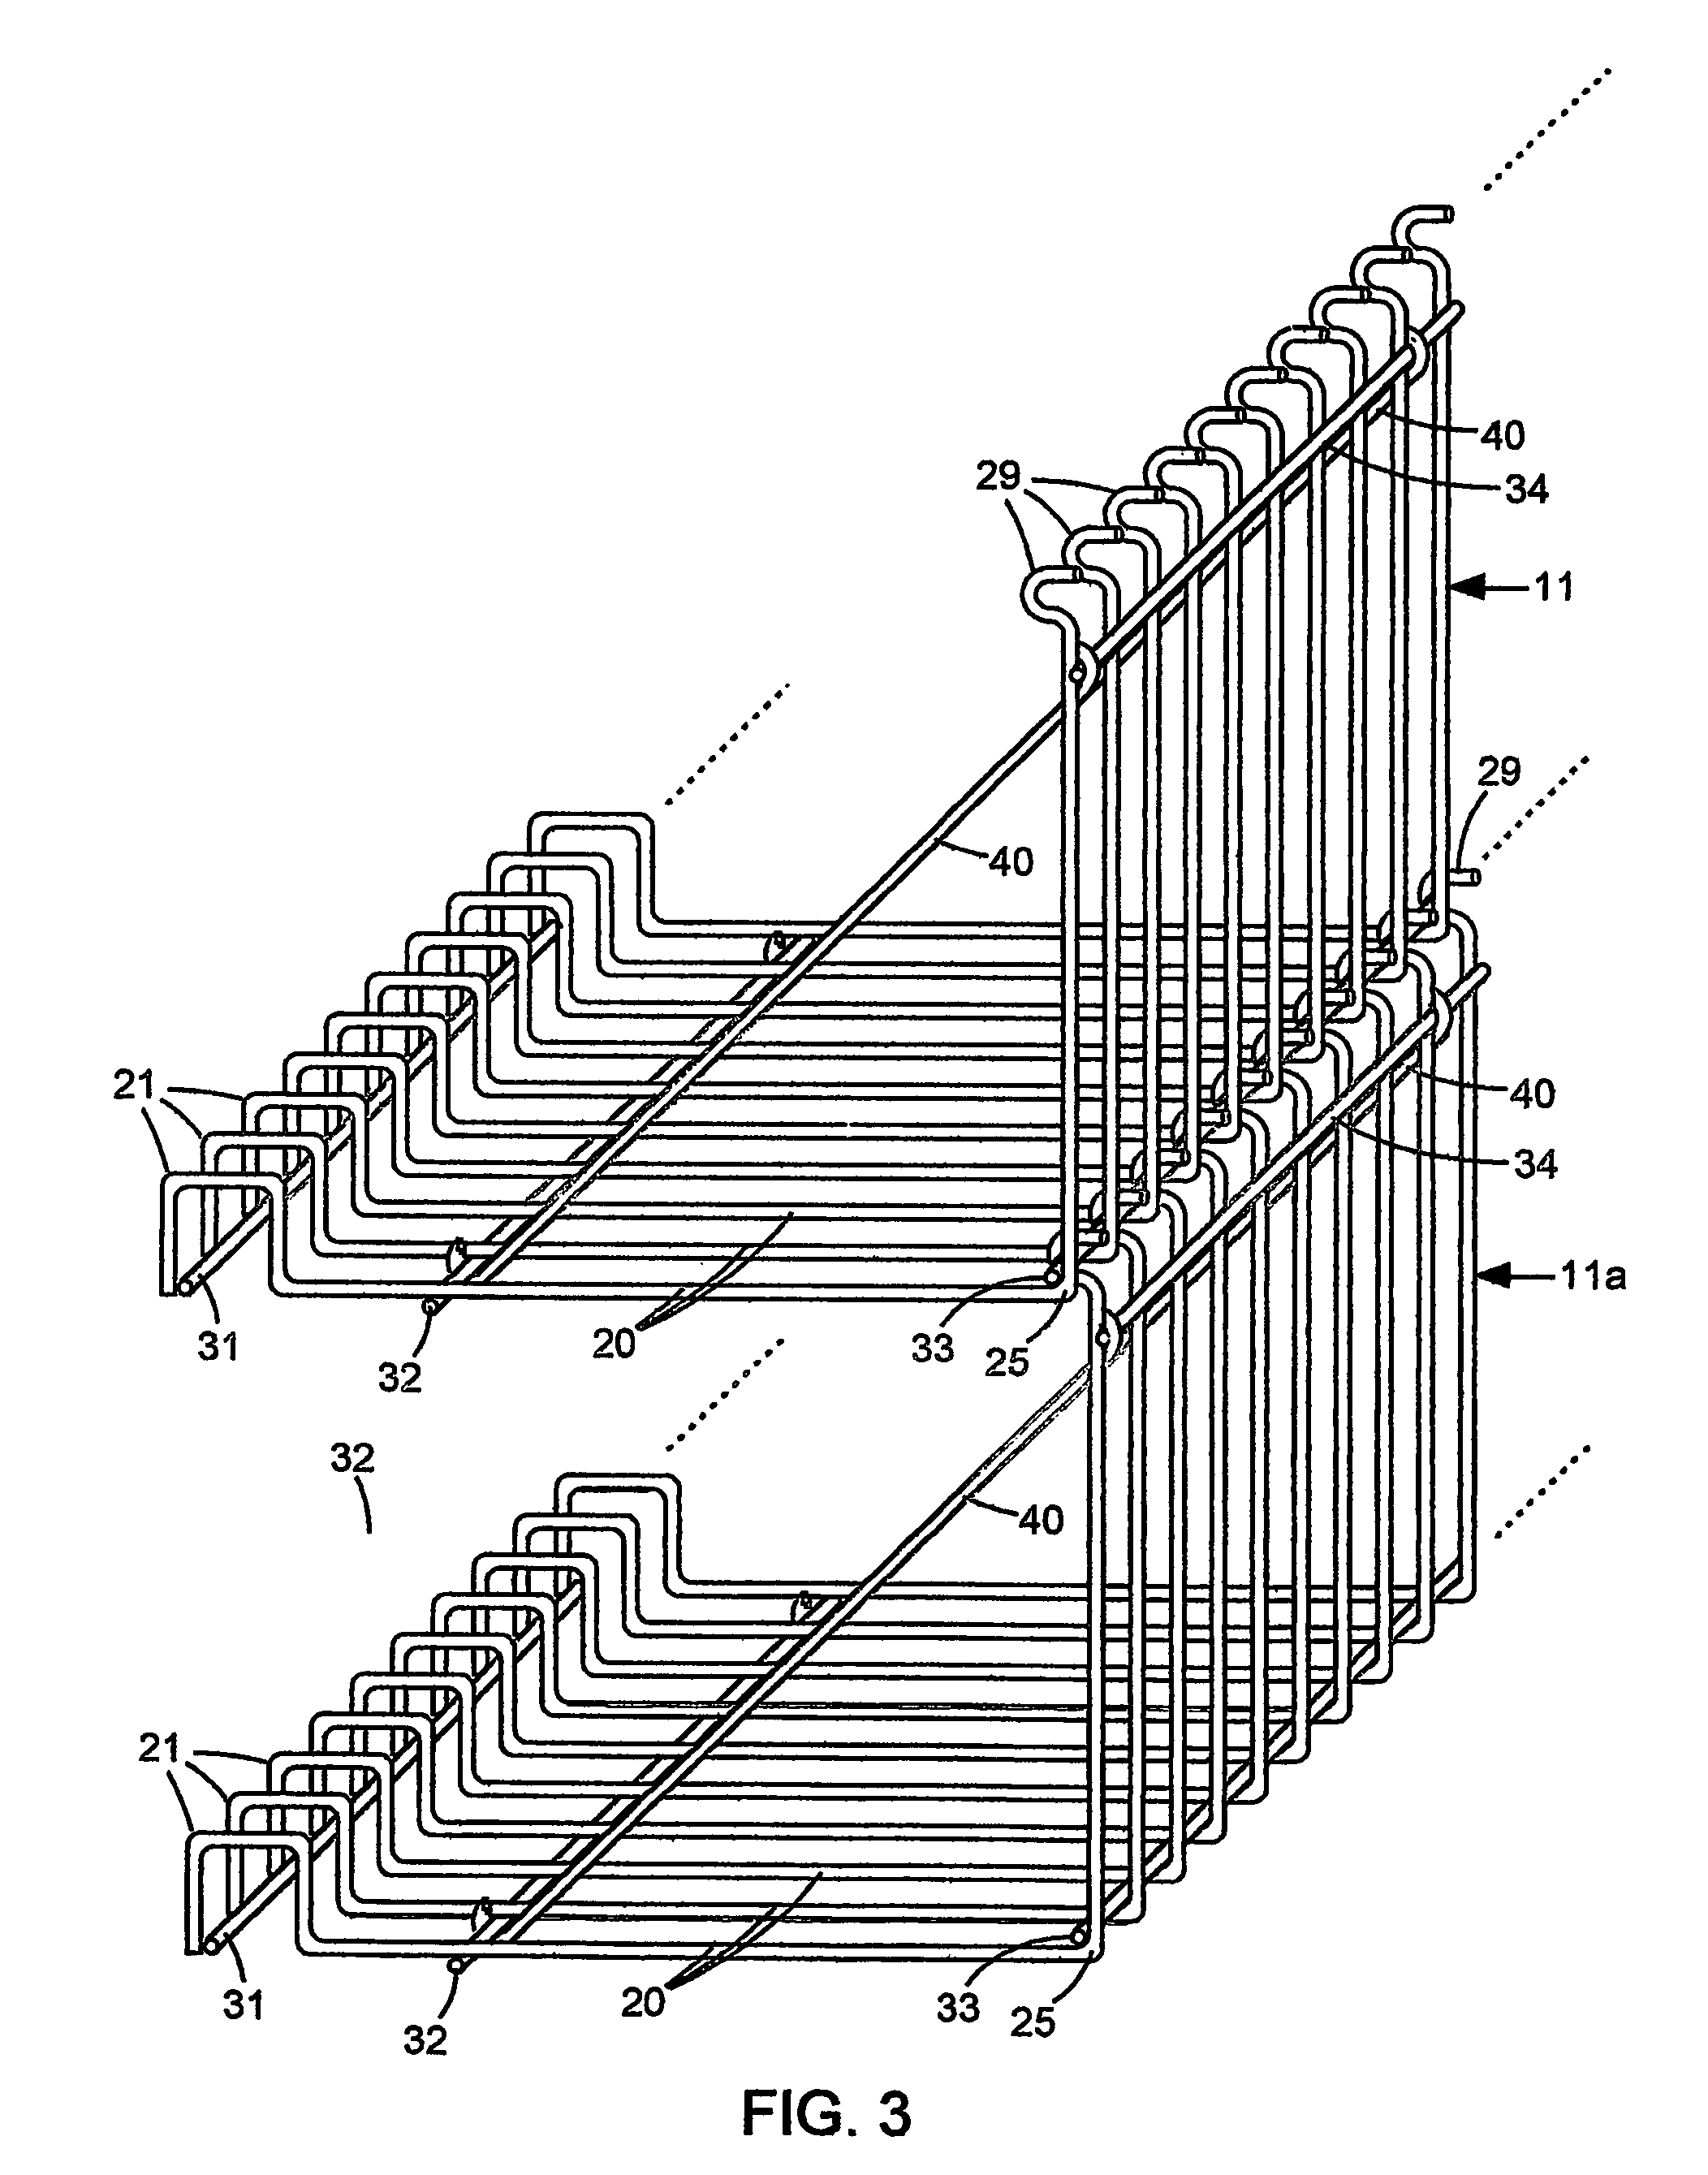 Apparatus and method for stabilizing an earthen embankment